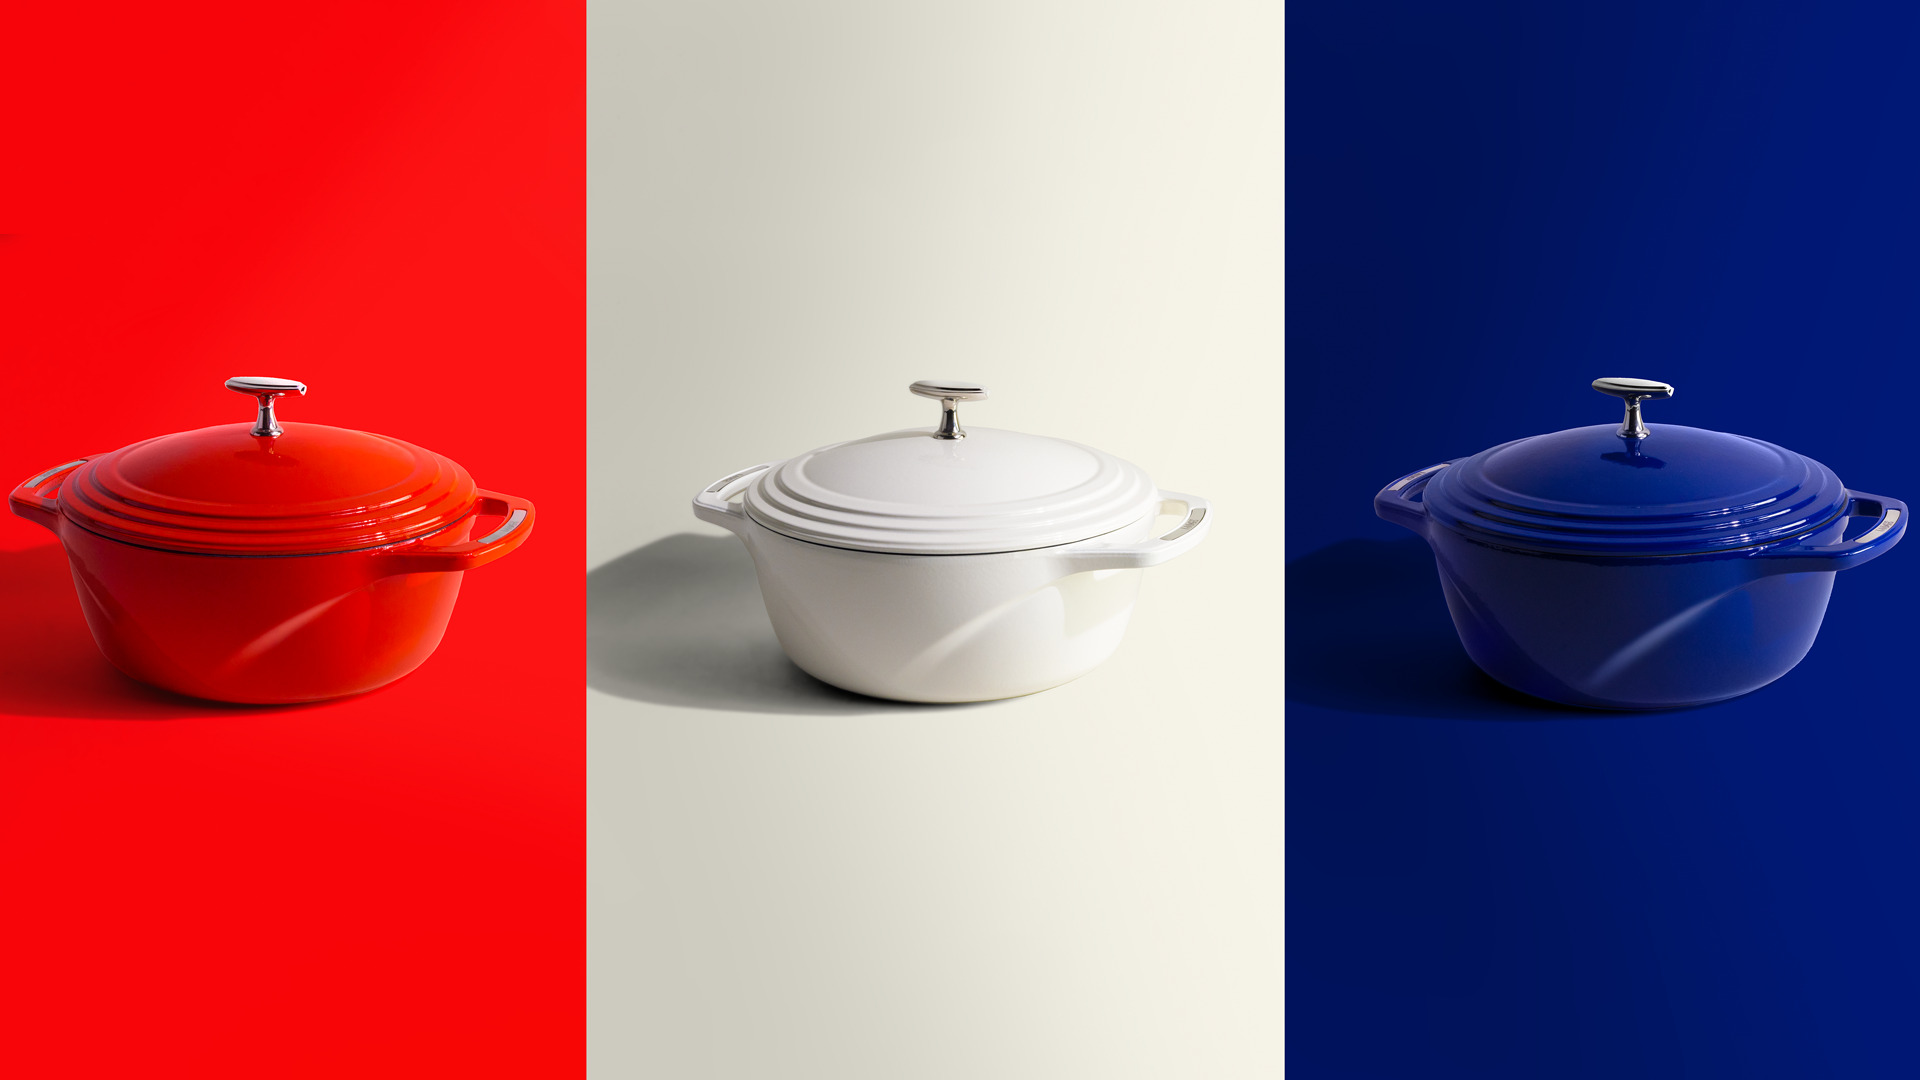 Lodge Cast Iron Debuts Red, White, and Blue Enamel Dutch Ovens, All Made in  the USA - Alliance for American Manufacturing